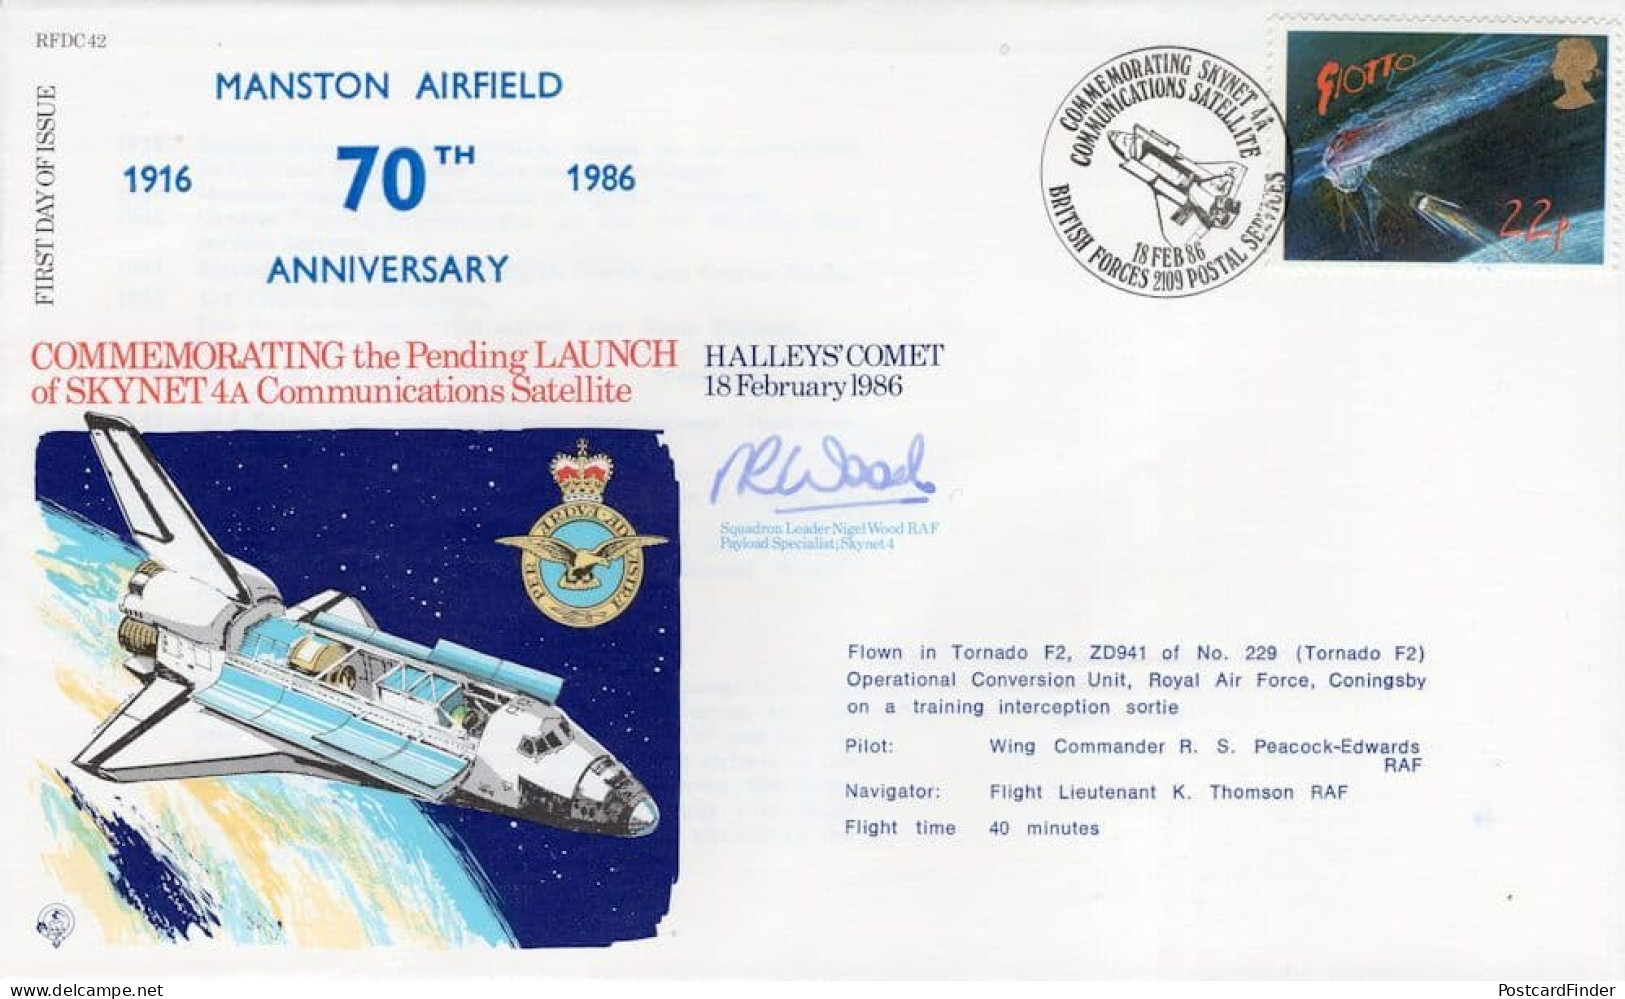 Halley's Comet Manston Airfield 1916 Anniversary Hand Signed FDC - Militares